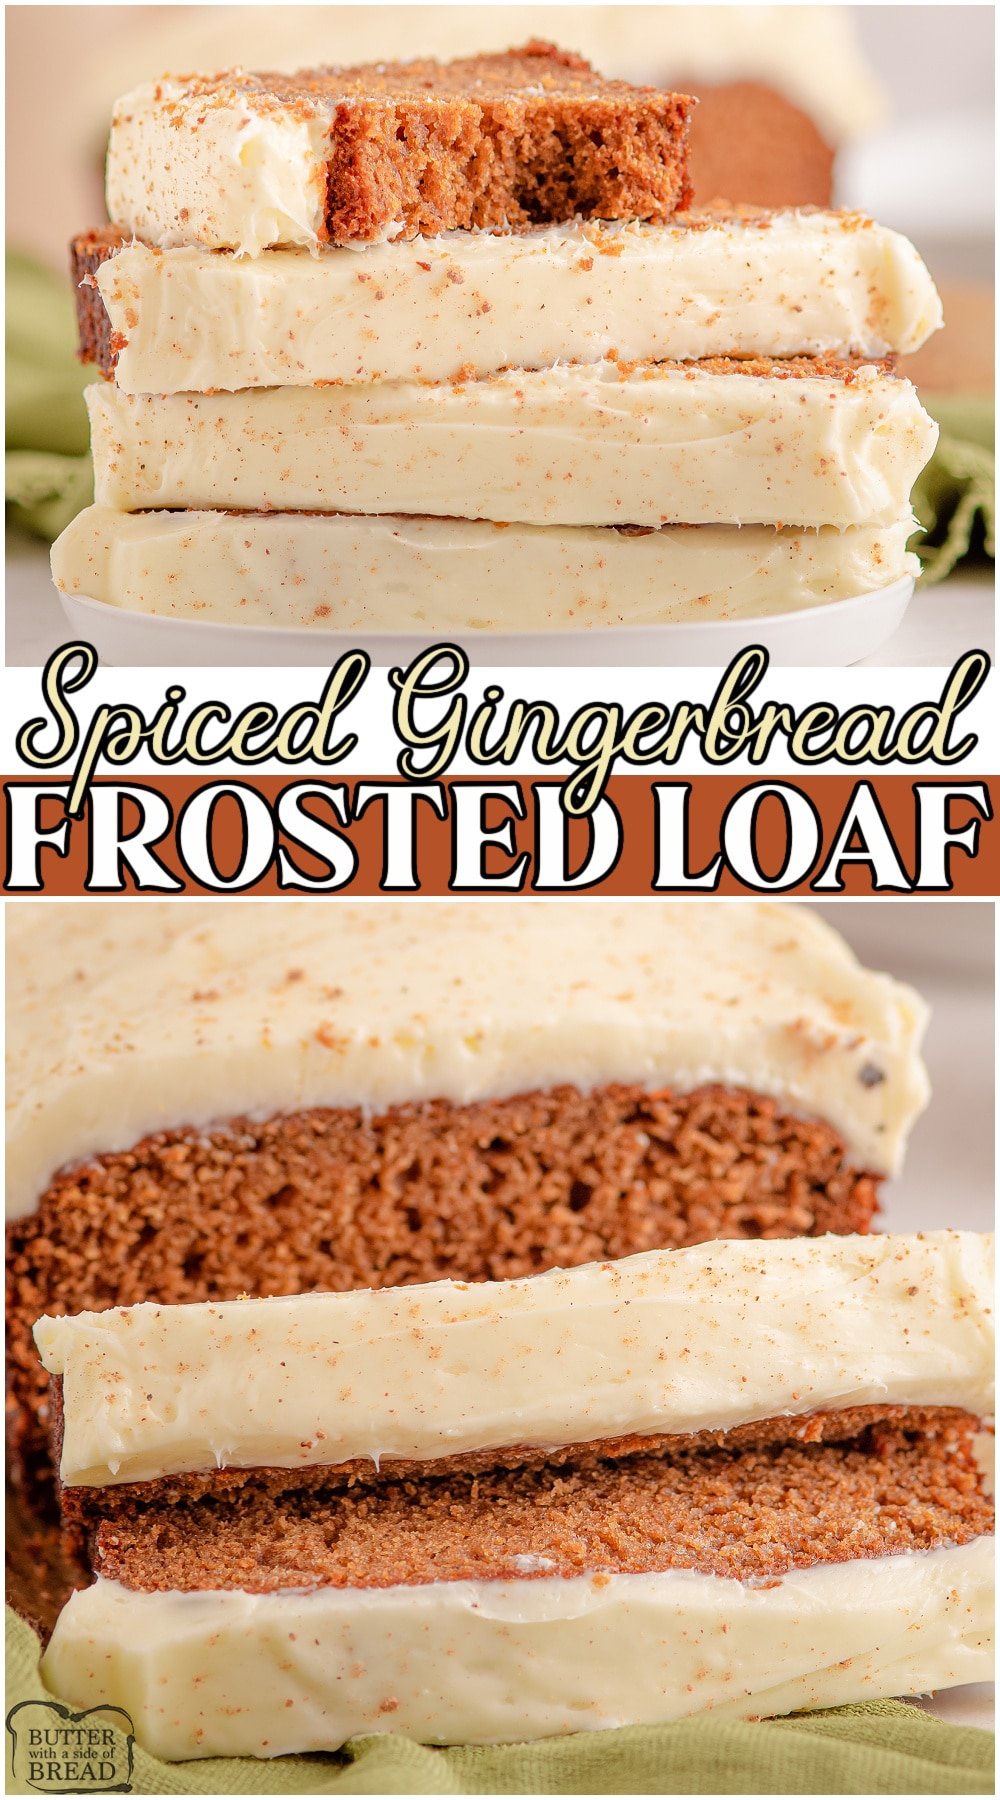 Frosted Gingerbread loaf made with butter, molasses, applesauce & a blend of warm Fall spices! Delicious gingerbread quick bread with a smooth cream cheese frosting on top that everyone adores! 